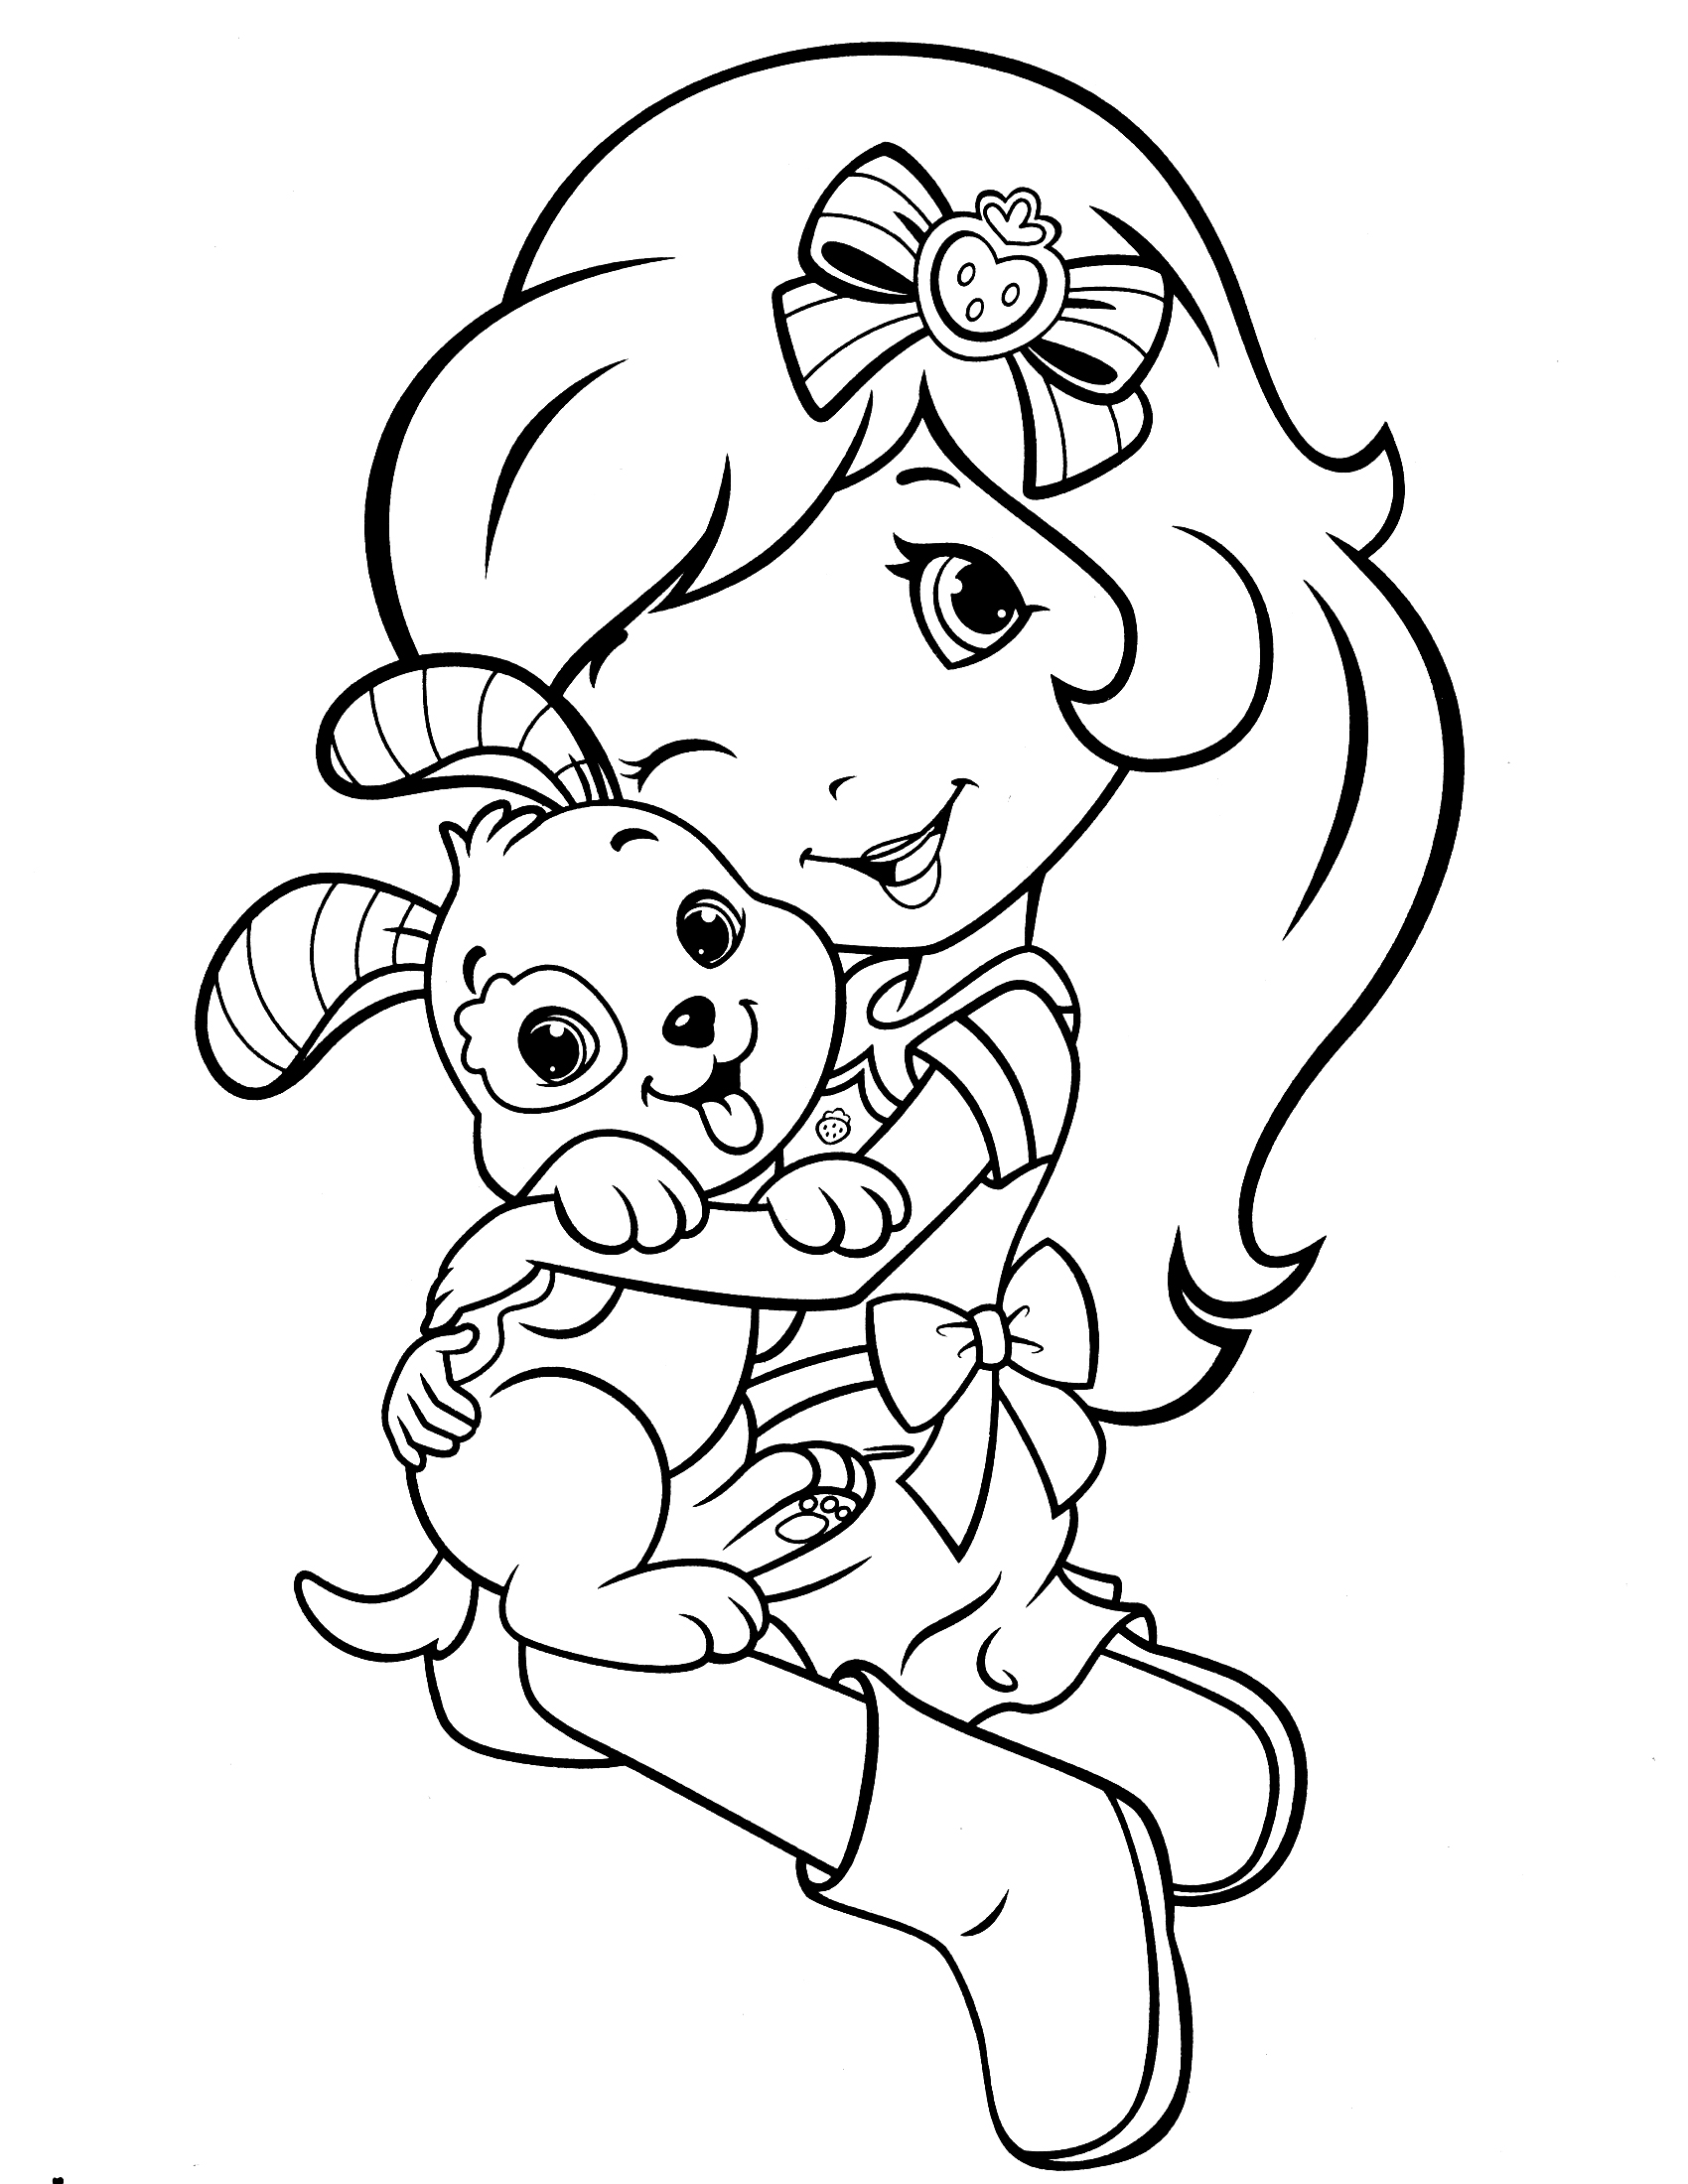 Strawberry Shortcake Coloring Pages Cool coloring pages